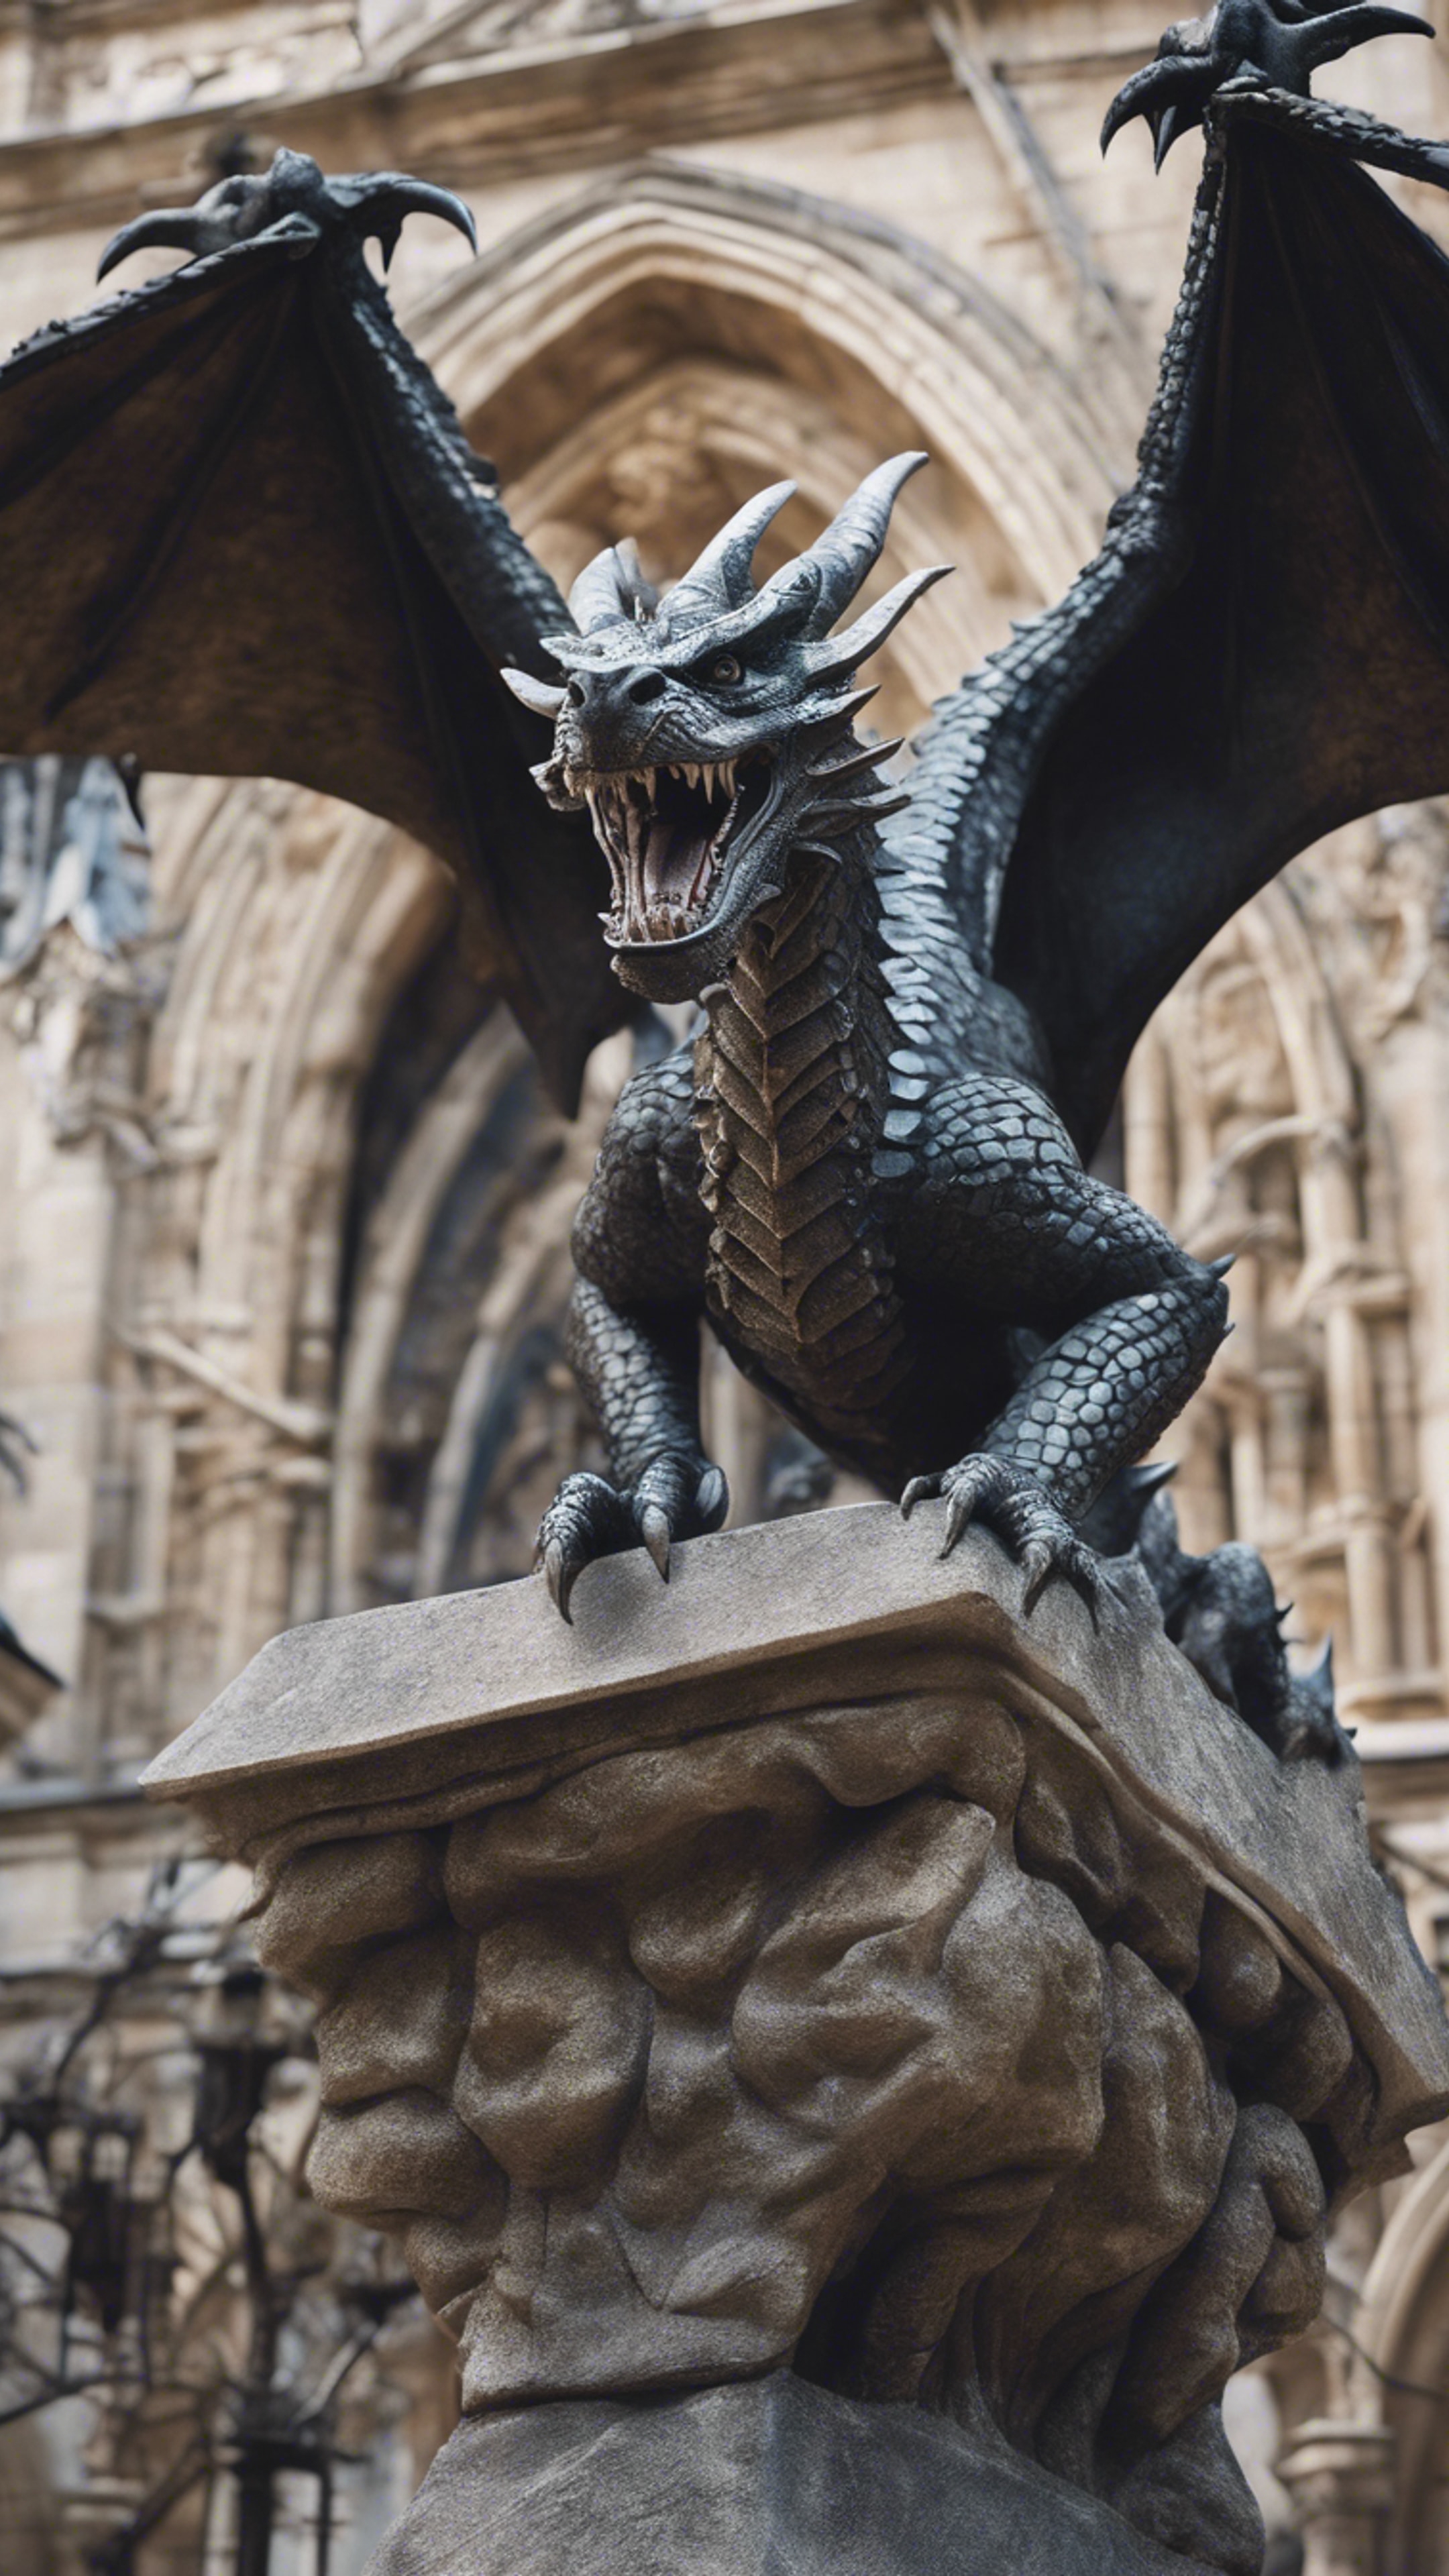 A stone dragon coming to life from the sculpture in a gothic cathedral's courtyard. Fond d'écran[86d9df9db55943e58db6]